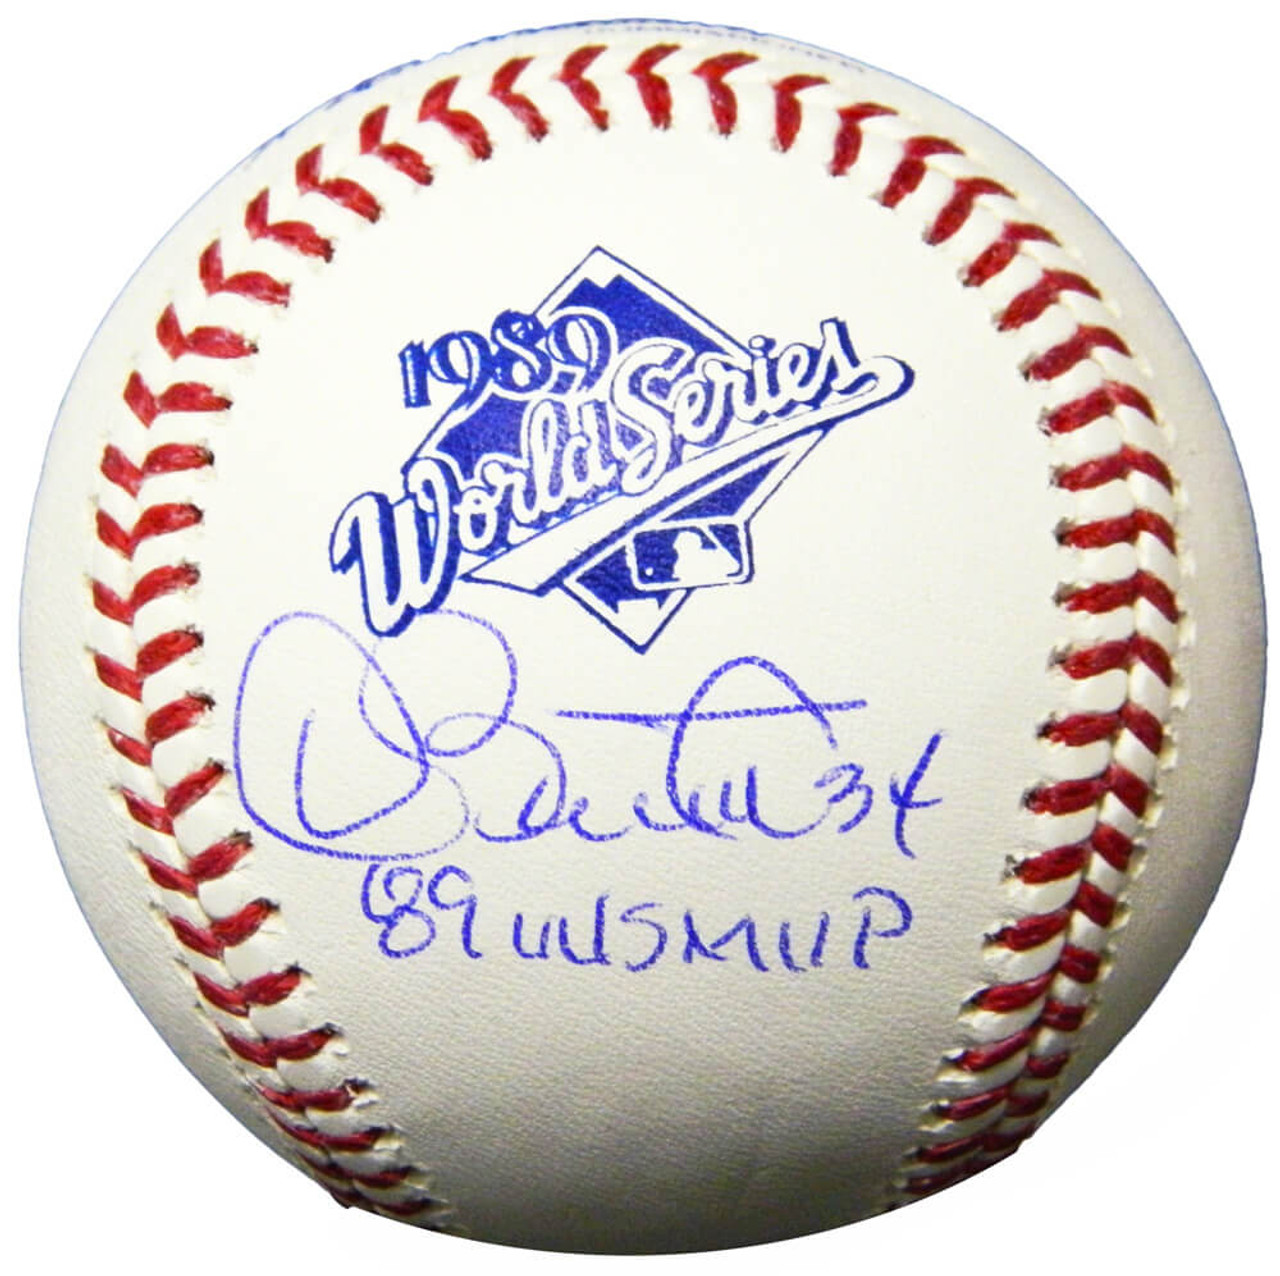 Dave Stewart Signed Rawlings 1989 World Series (Oakland A's